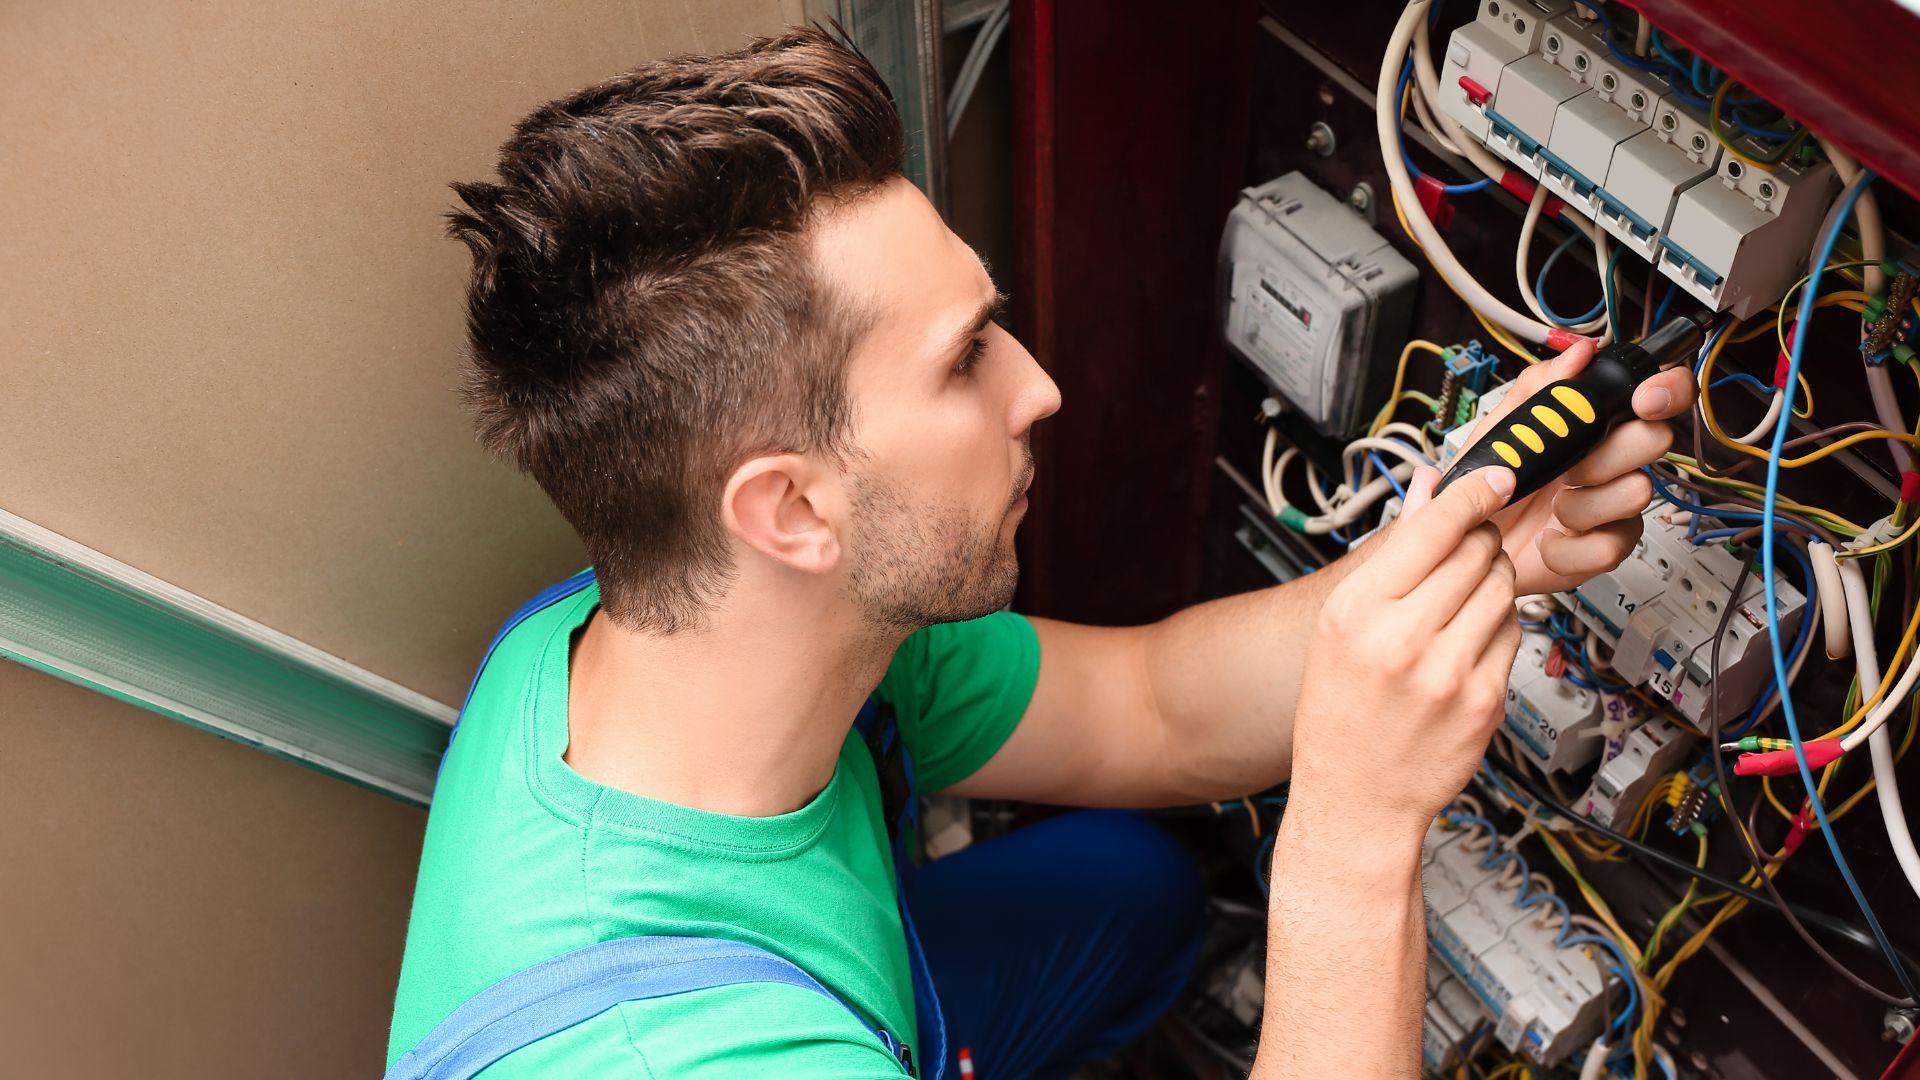 Services for the installation and replacement of home and house automation systems, ideal for electricians specializing in modern home setups.